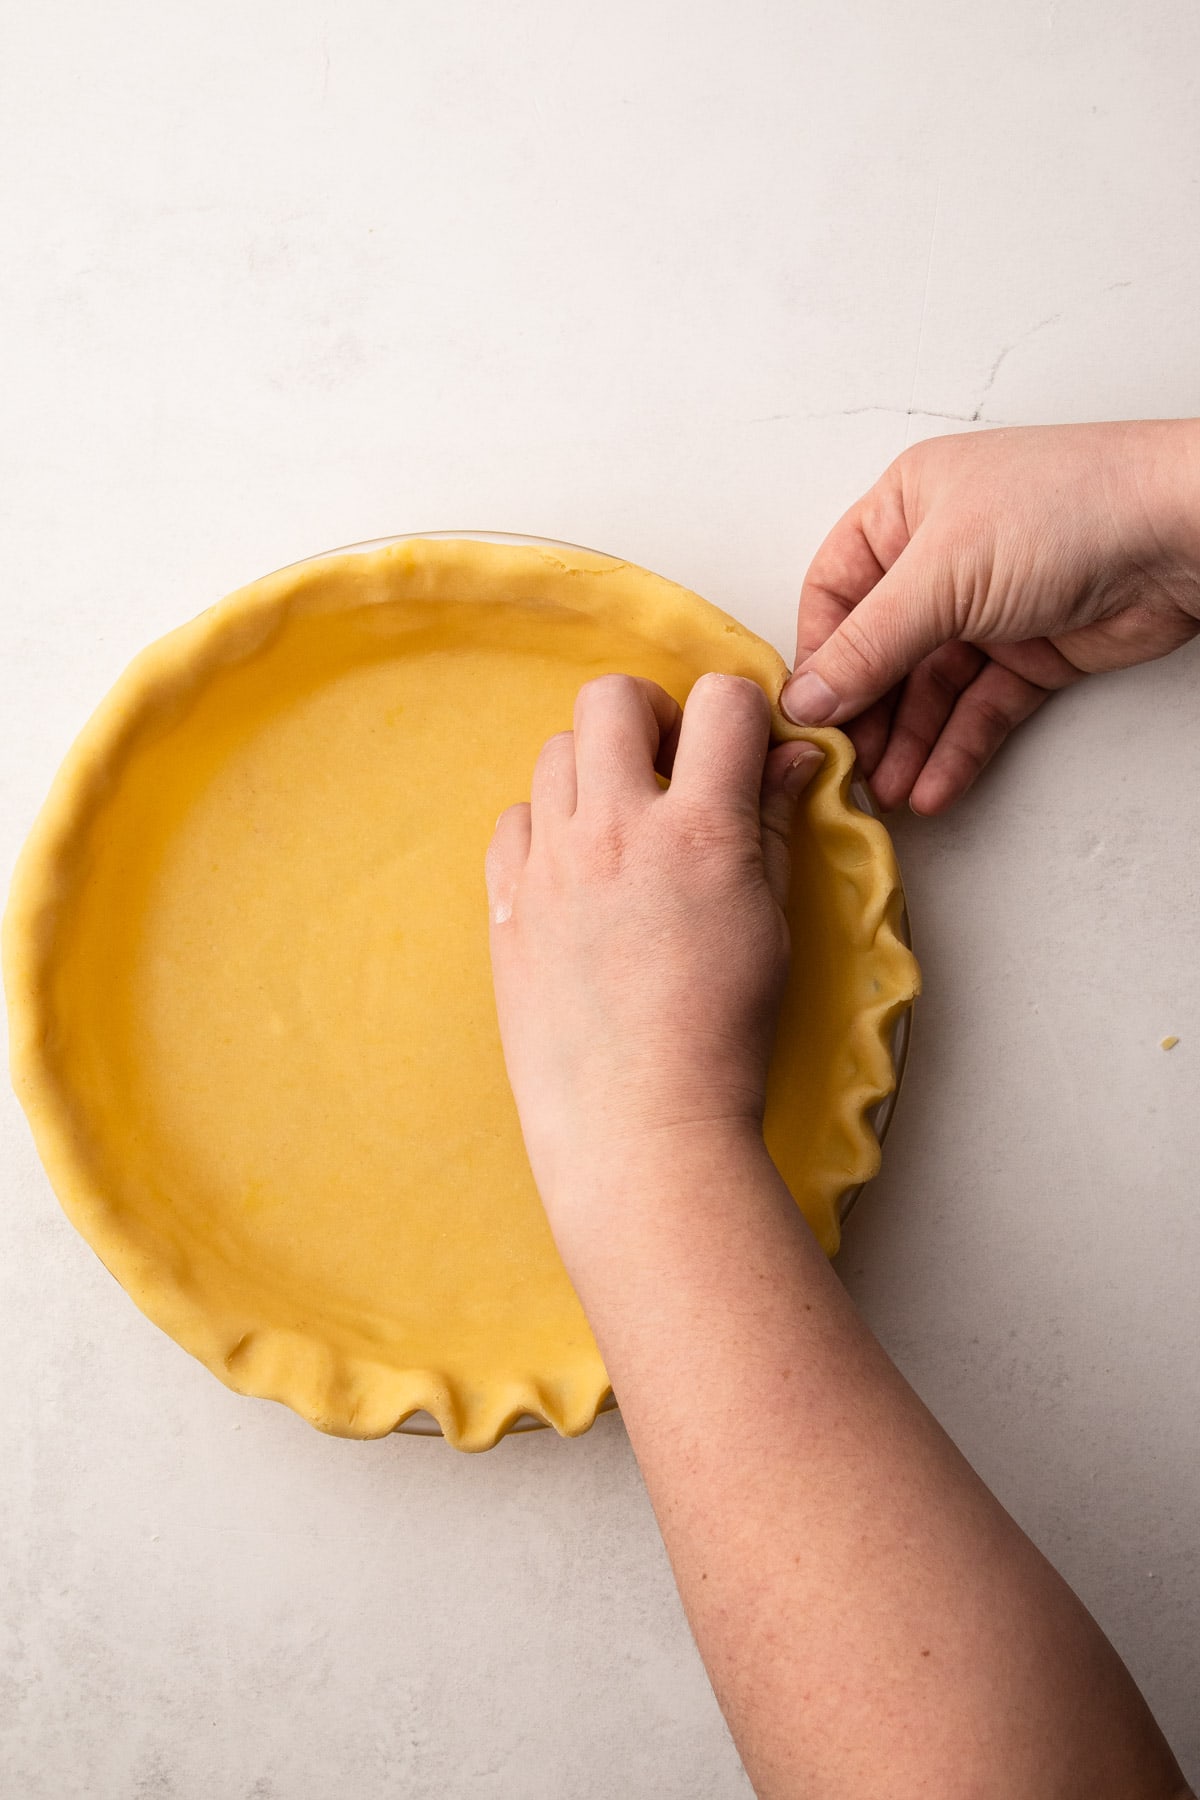 Crimping the edges of a shortbread pastry.